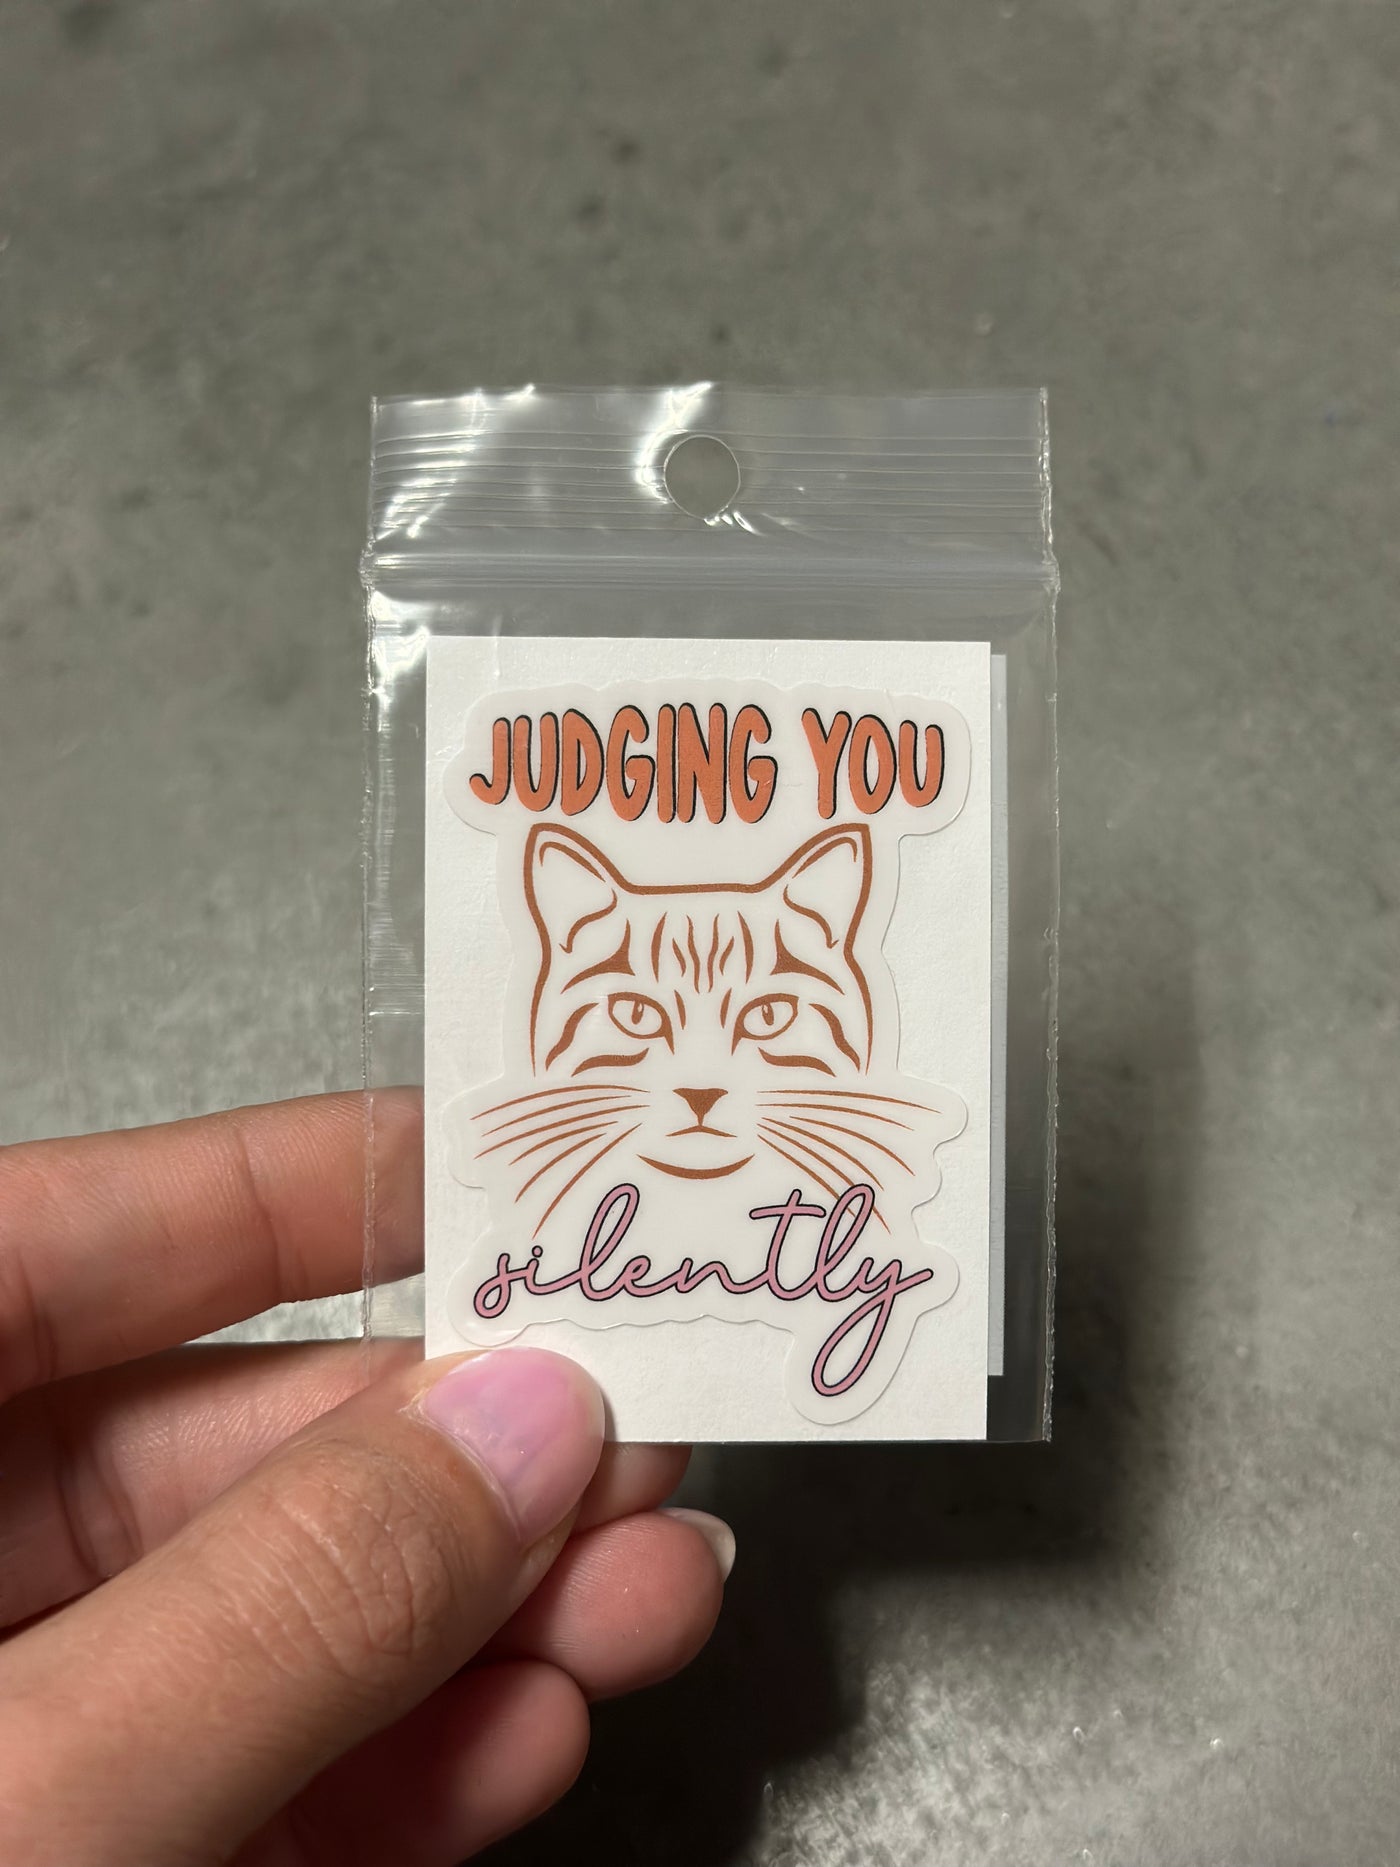 Judging you silently cat - Sticker